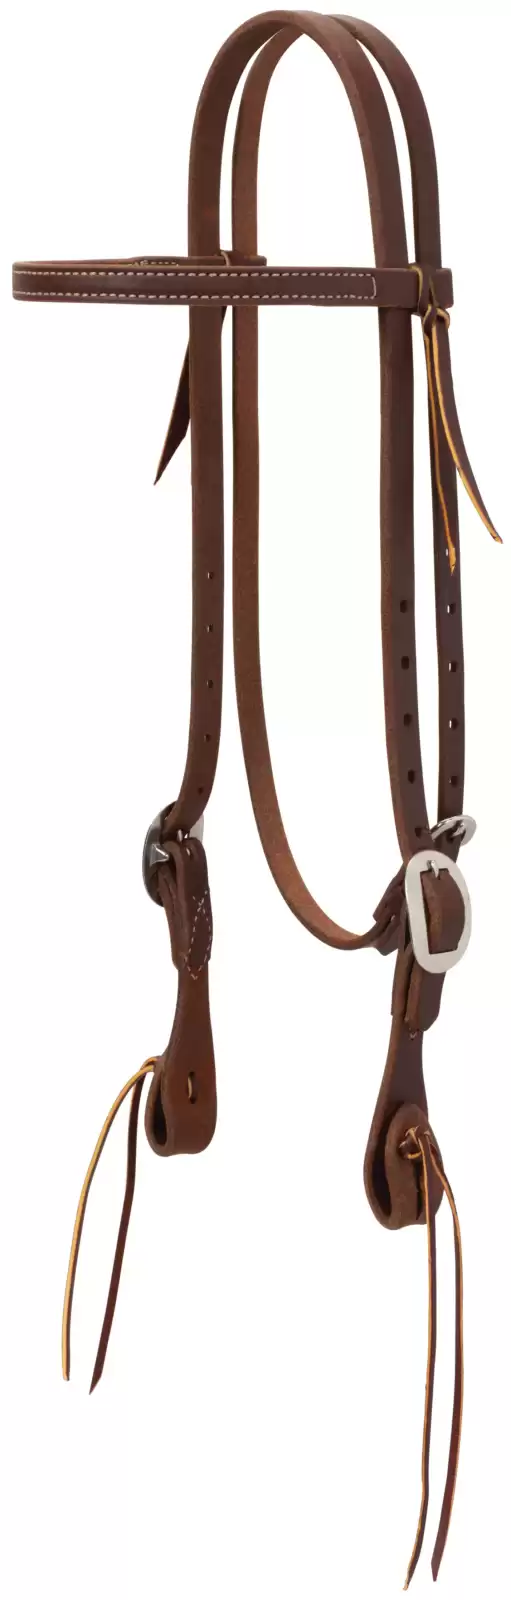 Weaver Pineapple Knot Browband Headstall – Canyon Rose